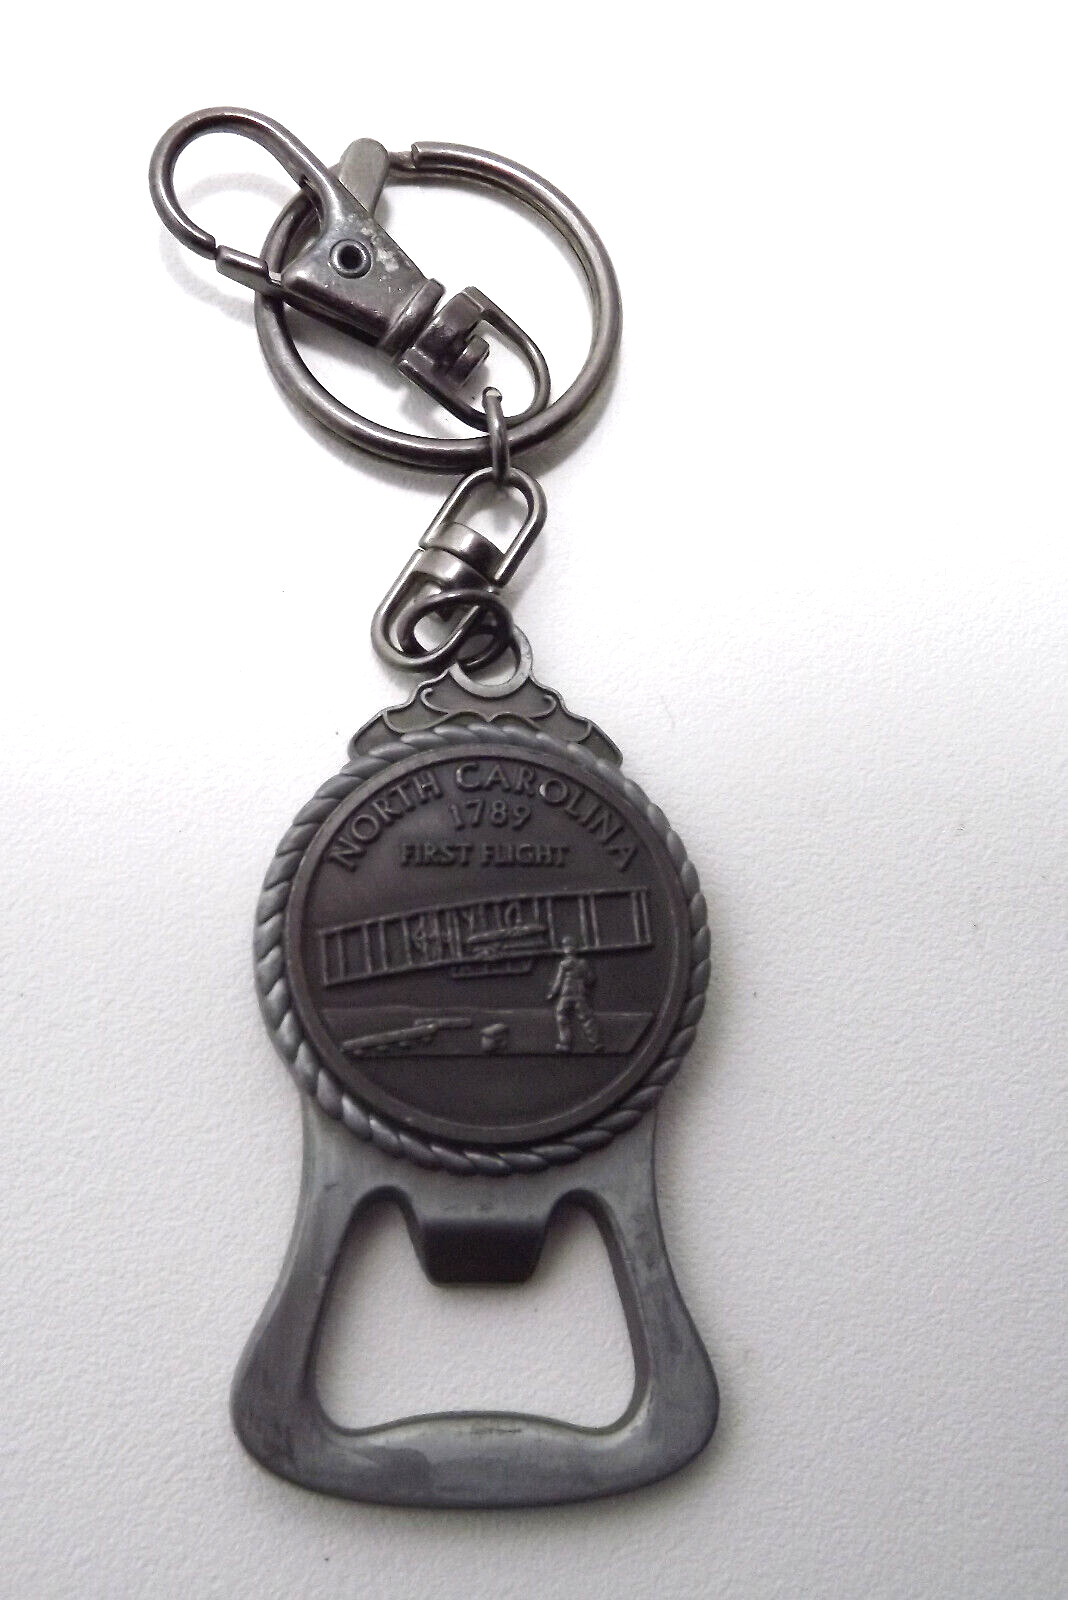 North Carolina First Flight bottle opener key chain by Vintage Collection